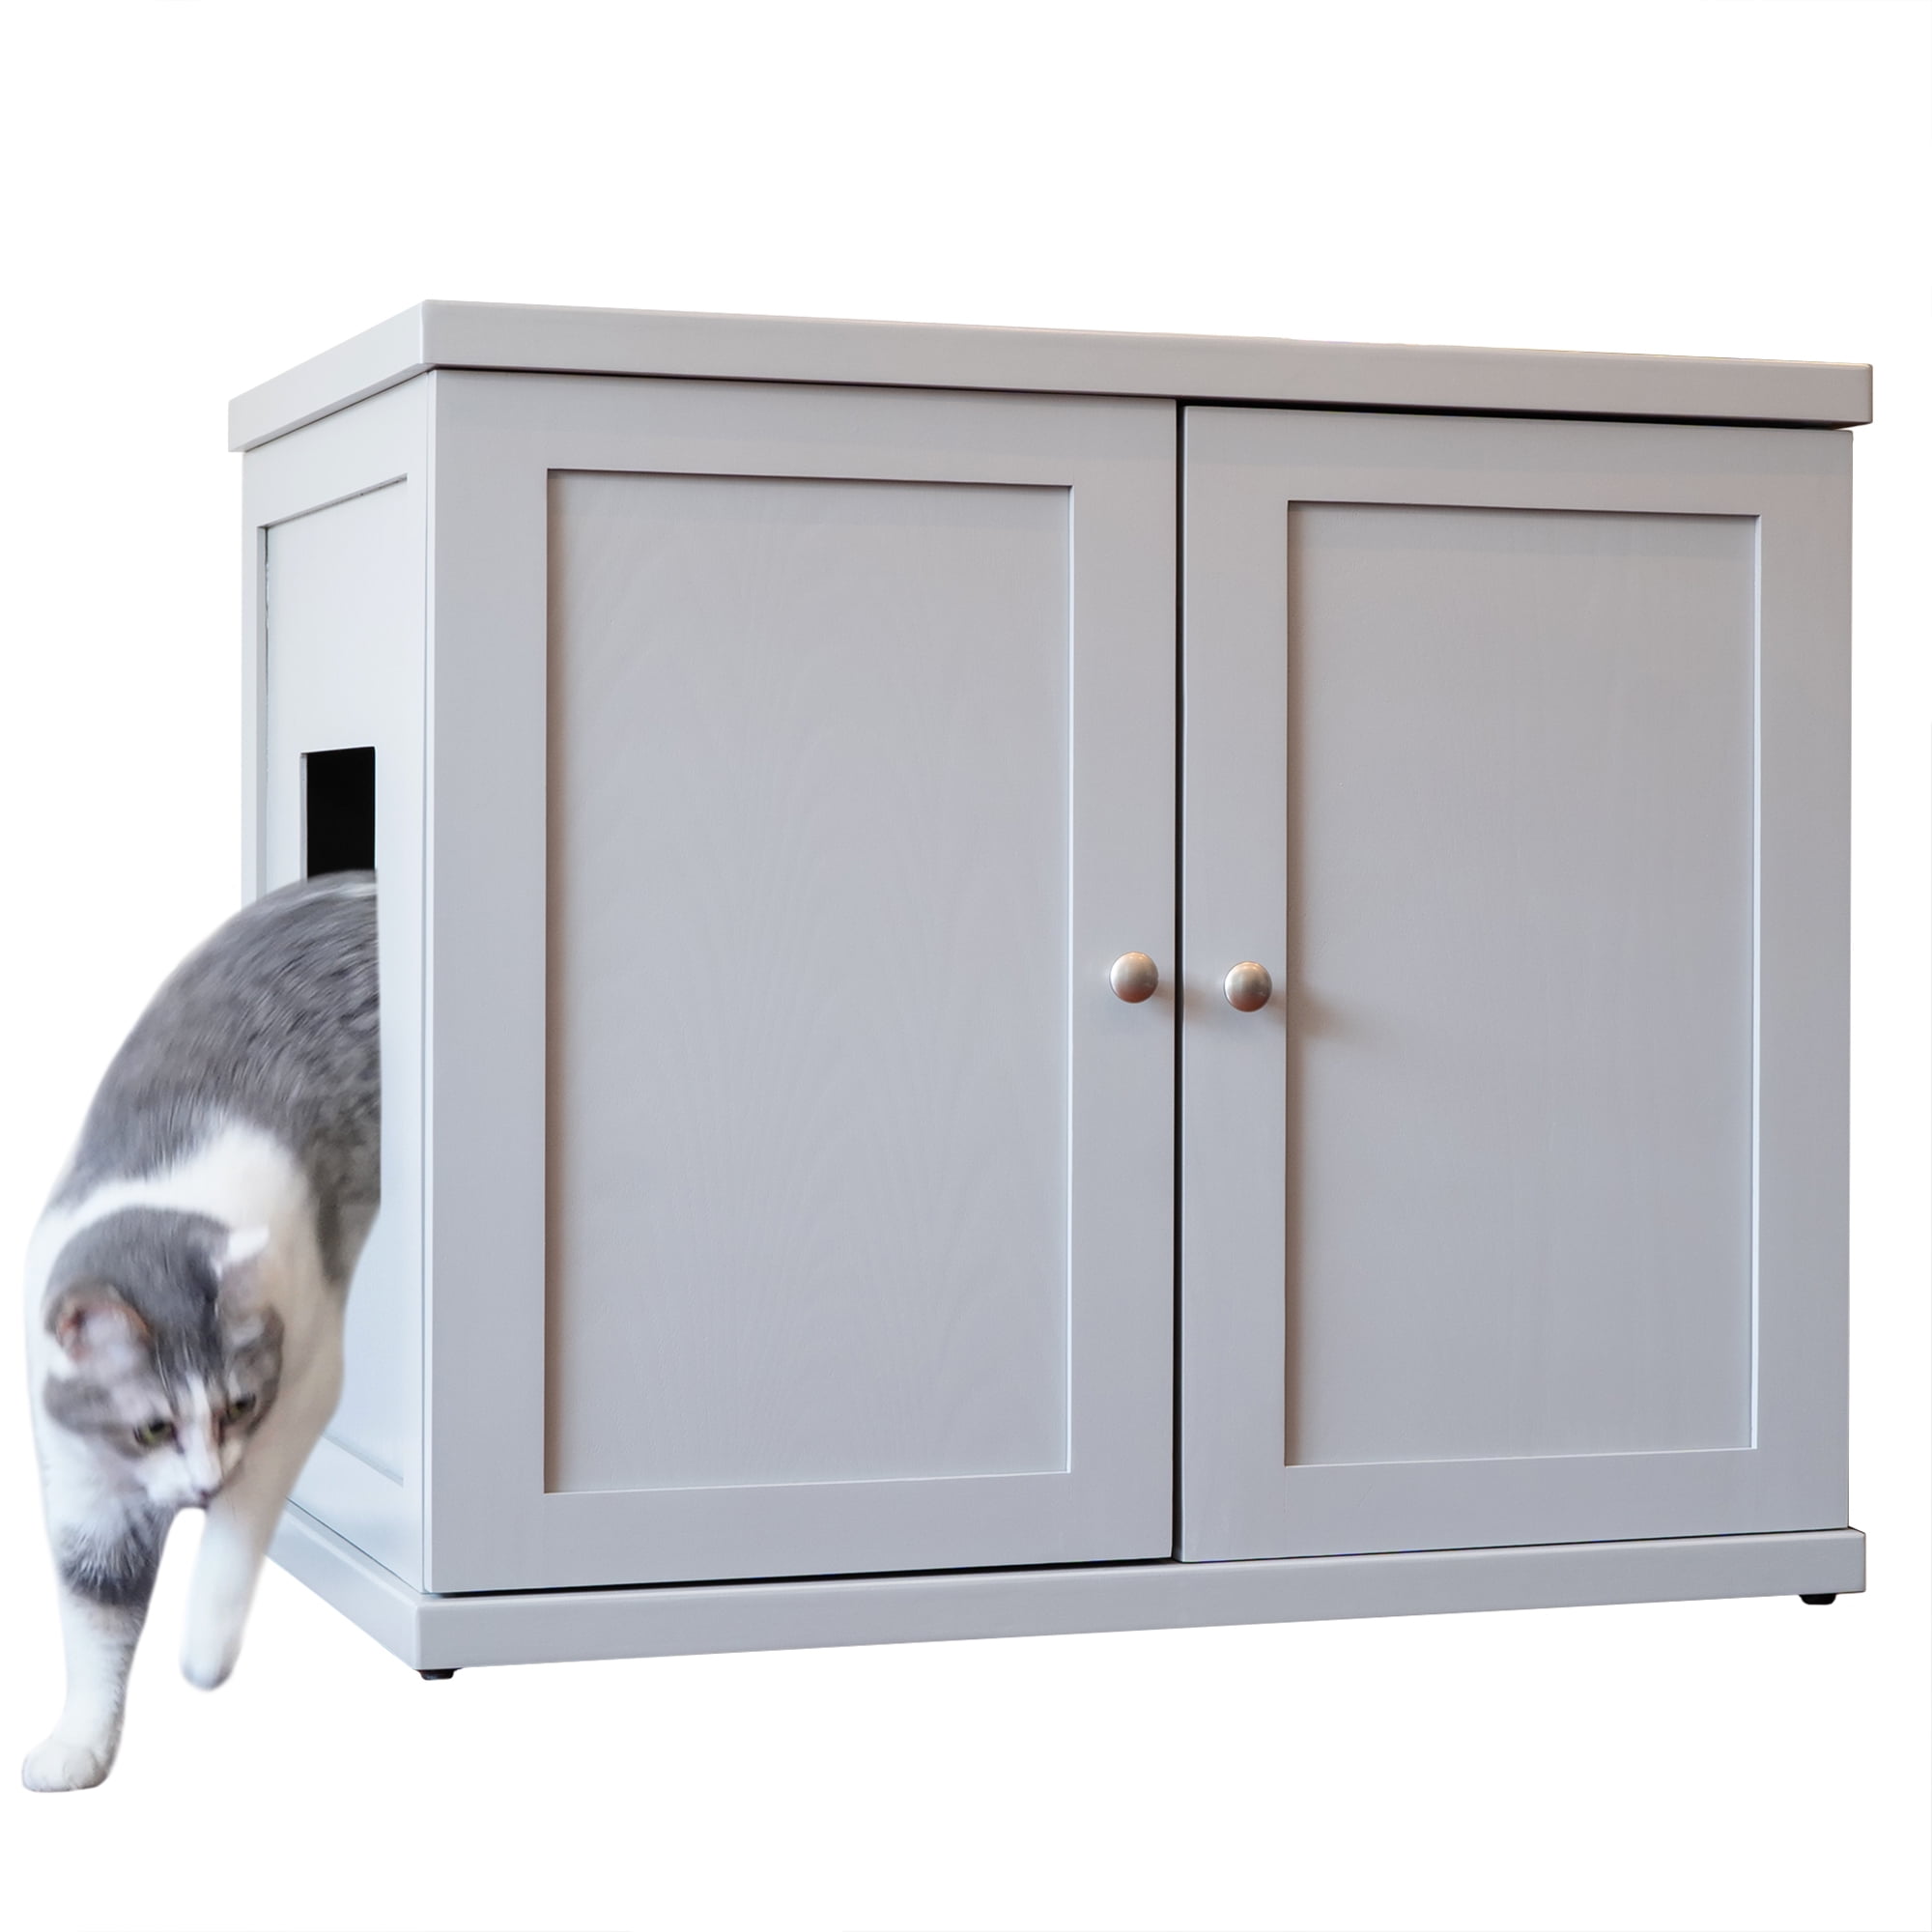 THE REFINED FELINE Cat Litter Box Enclosure Cabinet Cottage Style Hidden Litter Tray Cat Furniture Large XLarge Mahogany Color